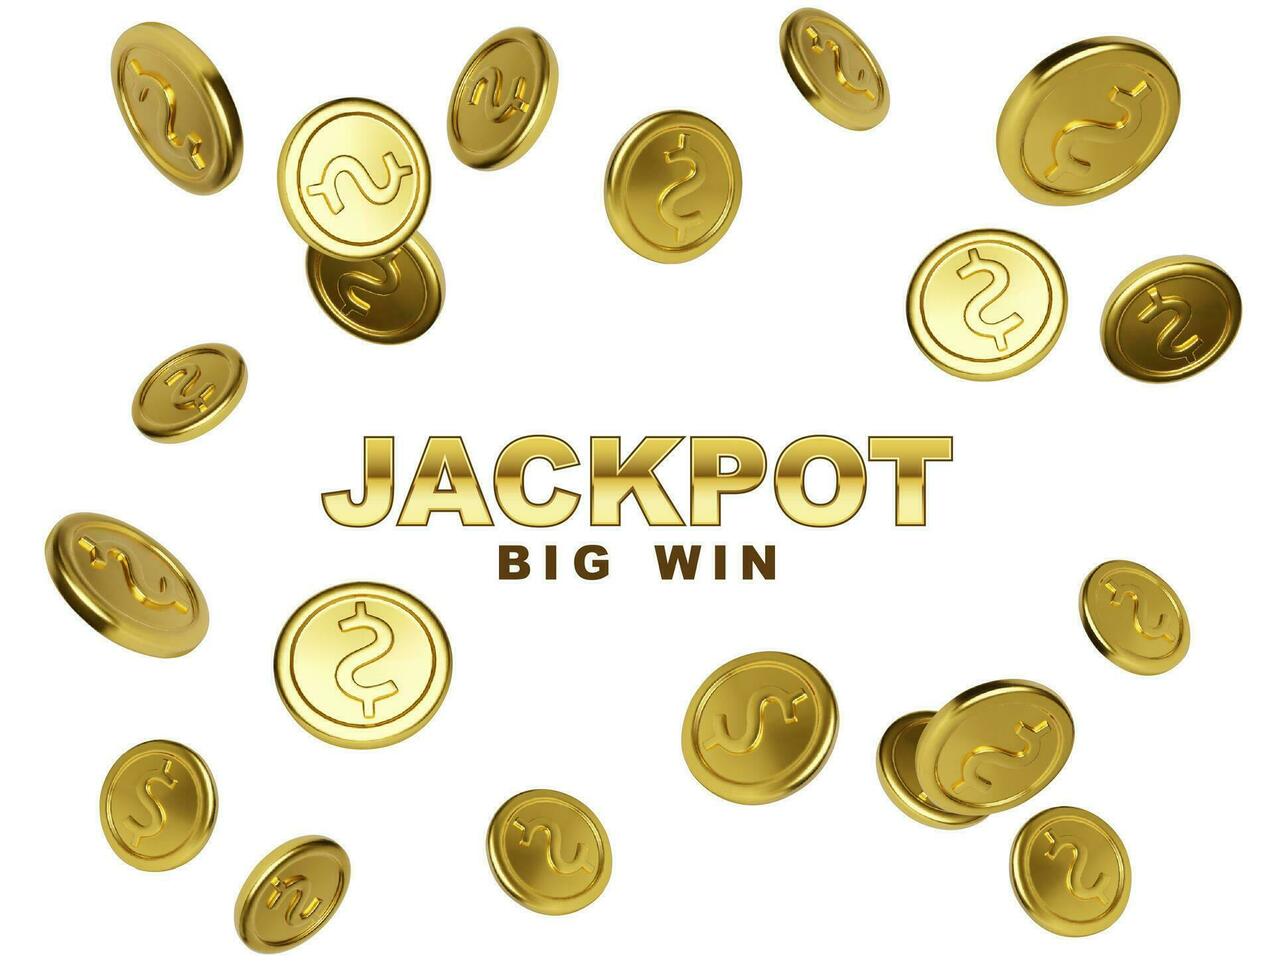 Jackpot casino winner. Big win banner with falling golden coins on white background. Vector illustration